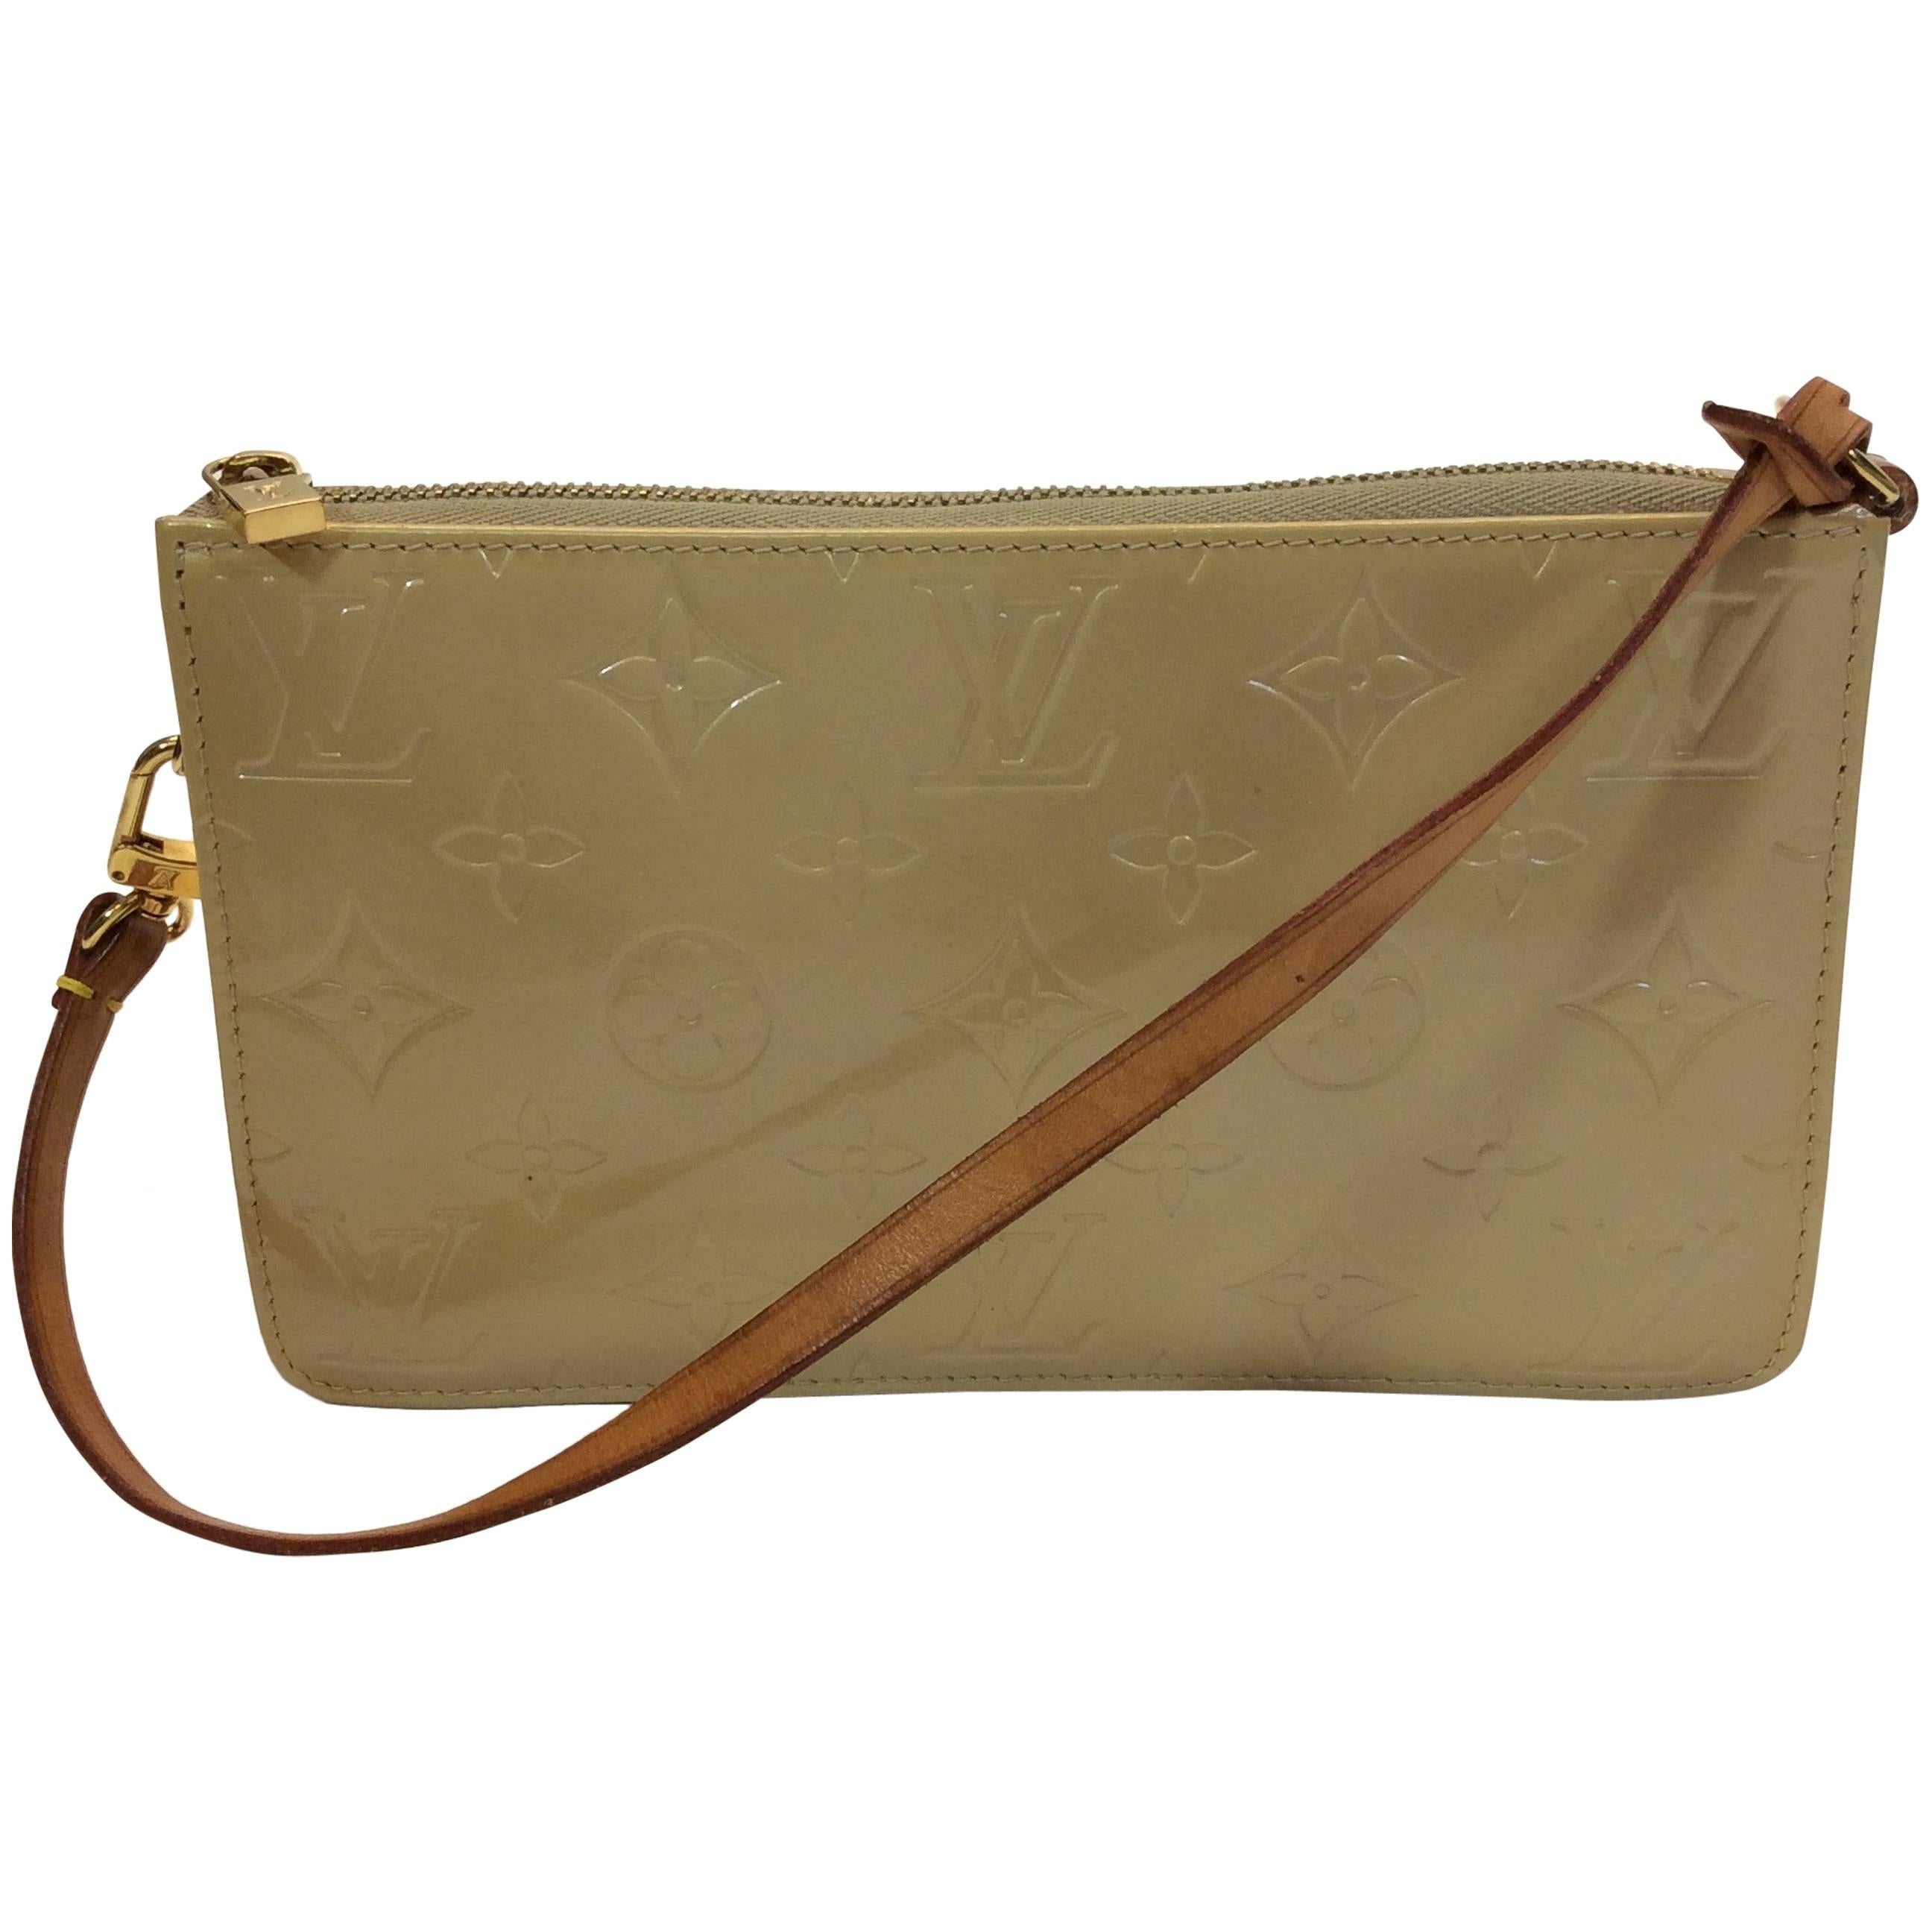 Louis Vuitton Small Tan Patent Leather Monogrammed Handbag For Sale